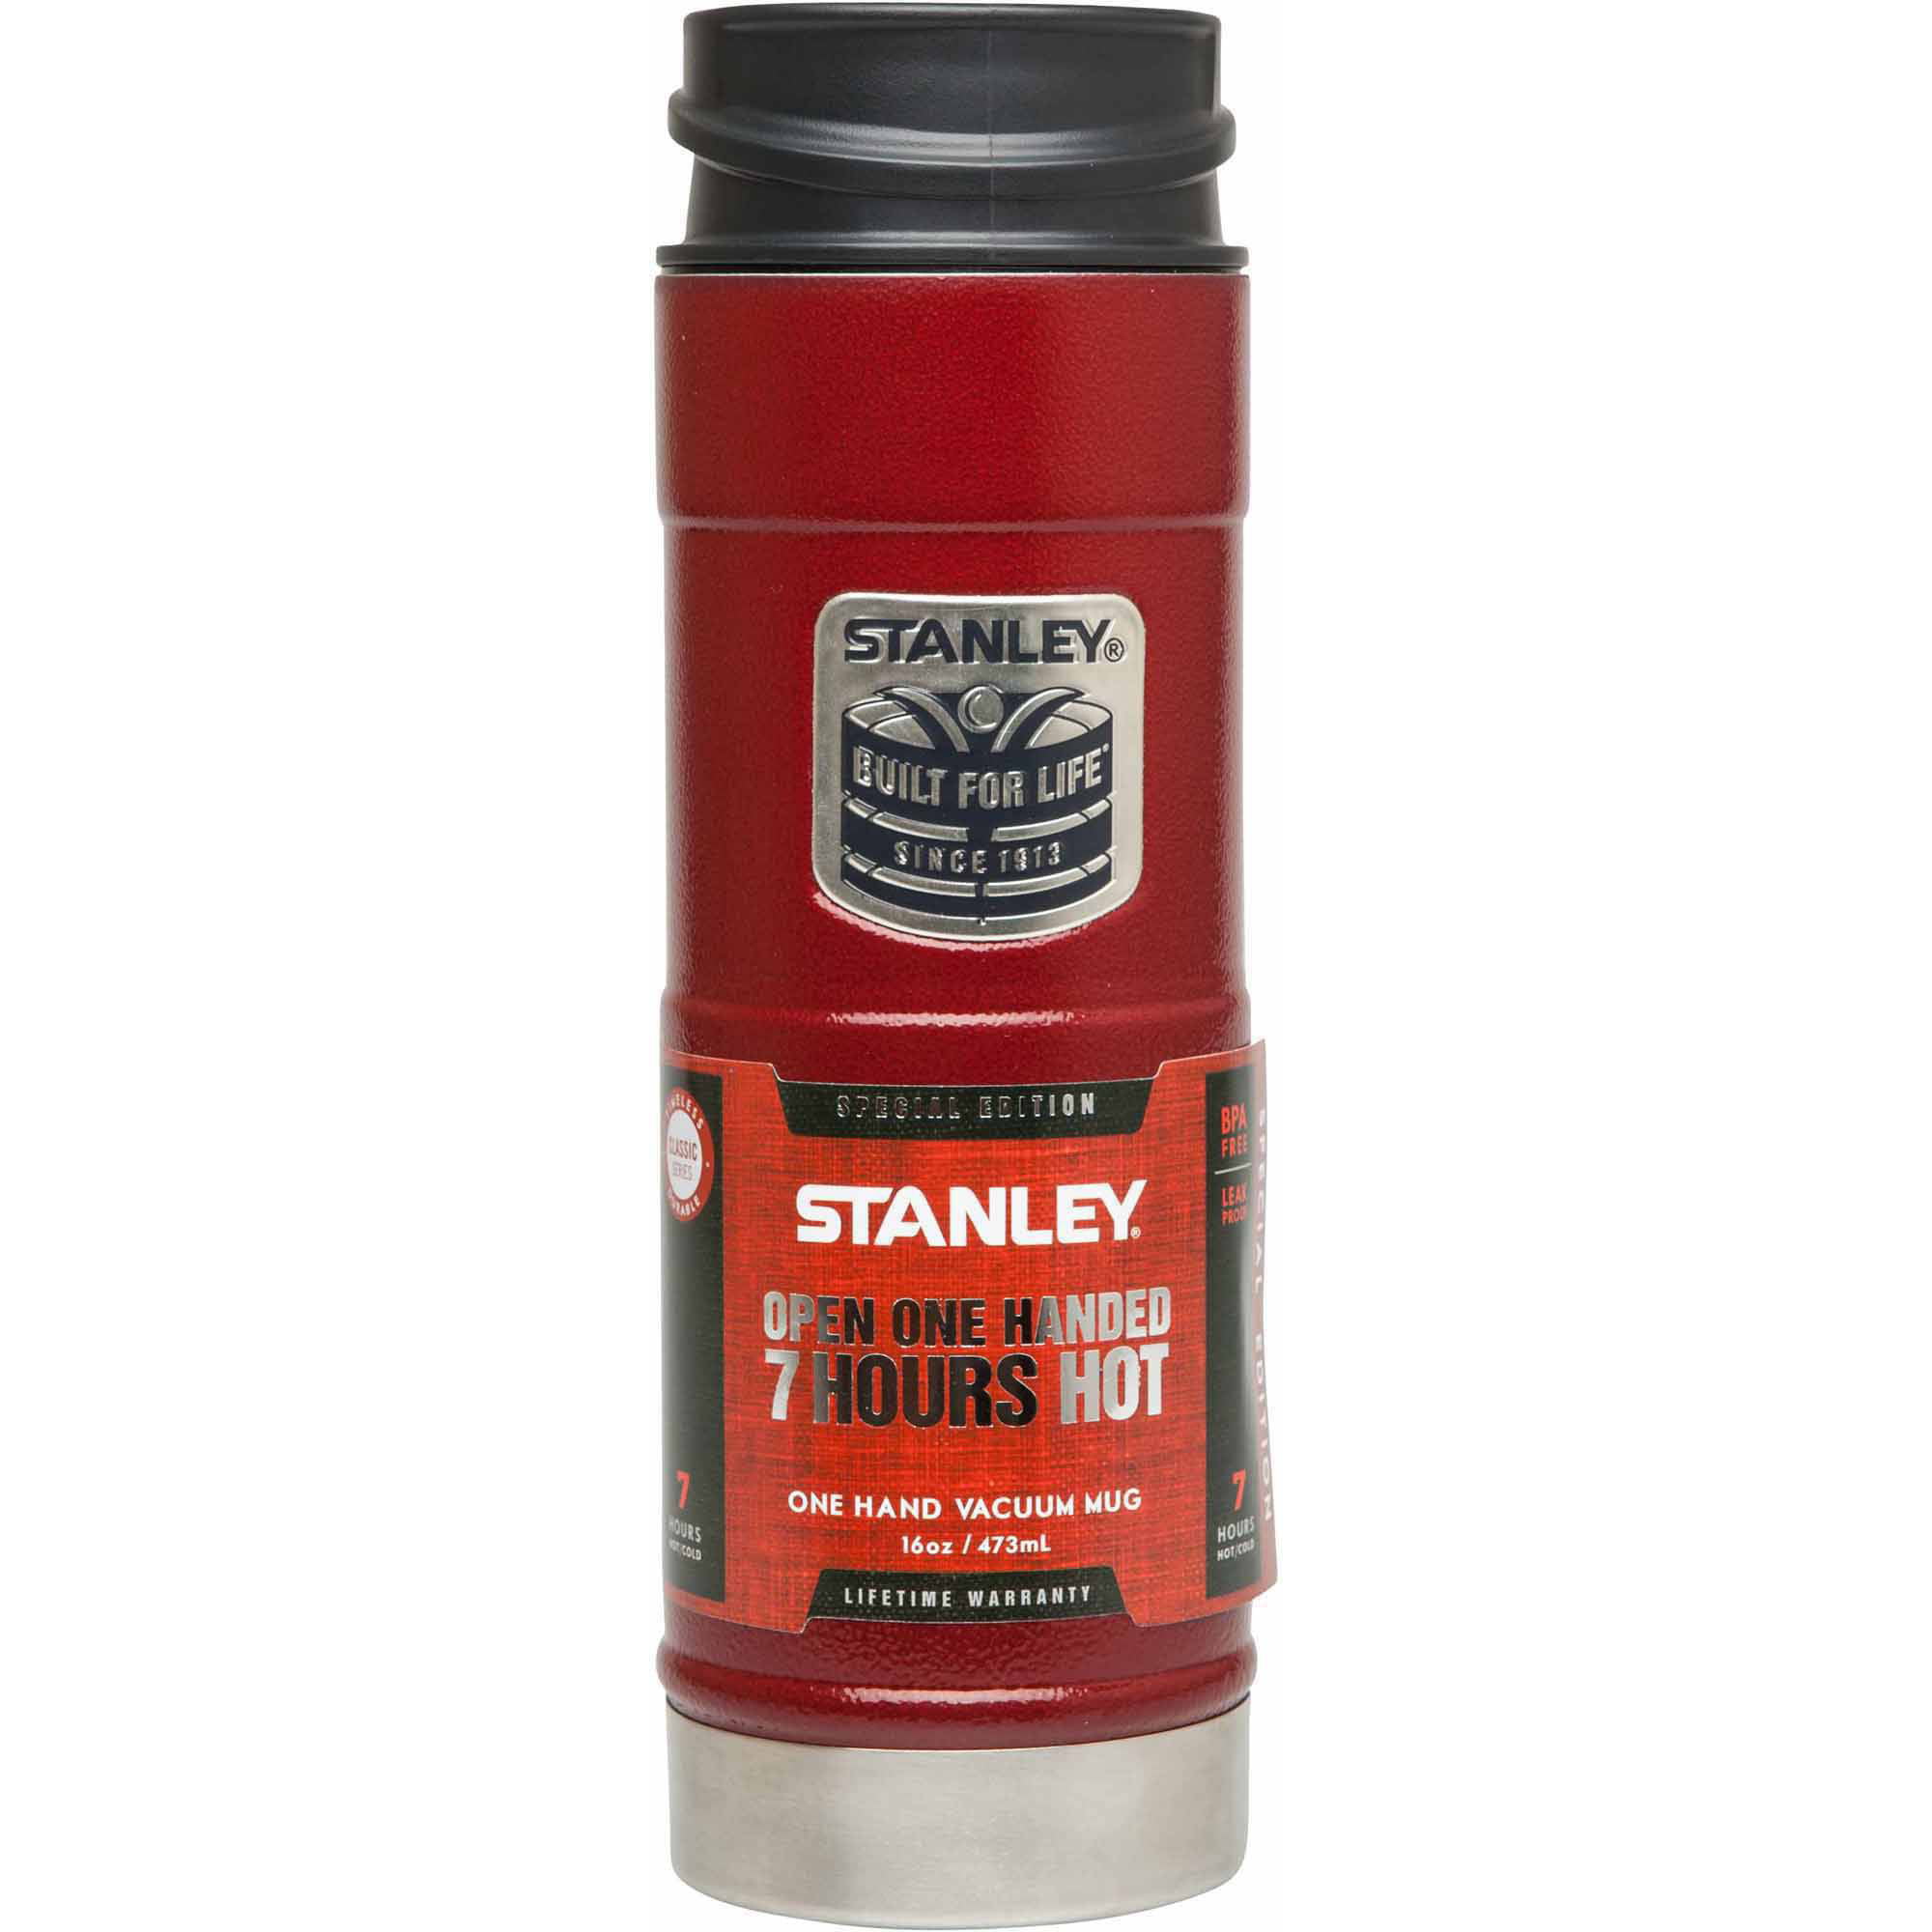 Stanley ANSI A156.10 Red Caution Stand Back Single Sided Sticker